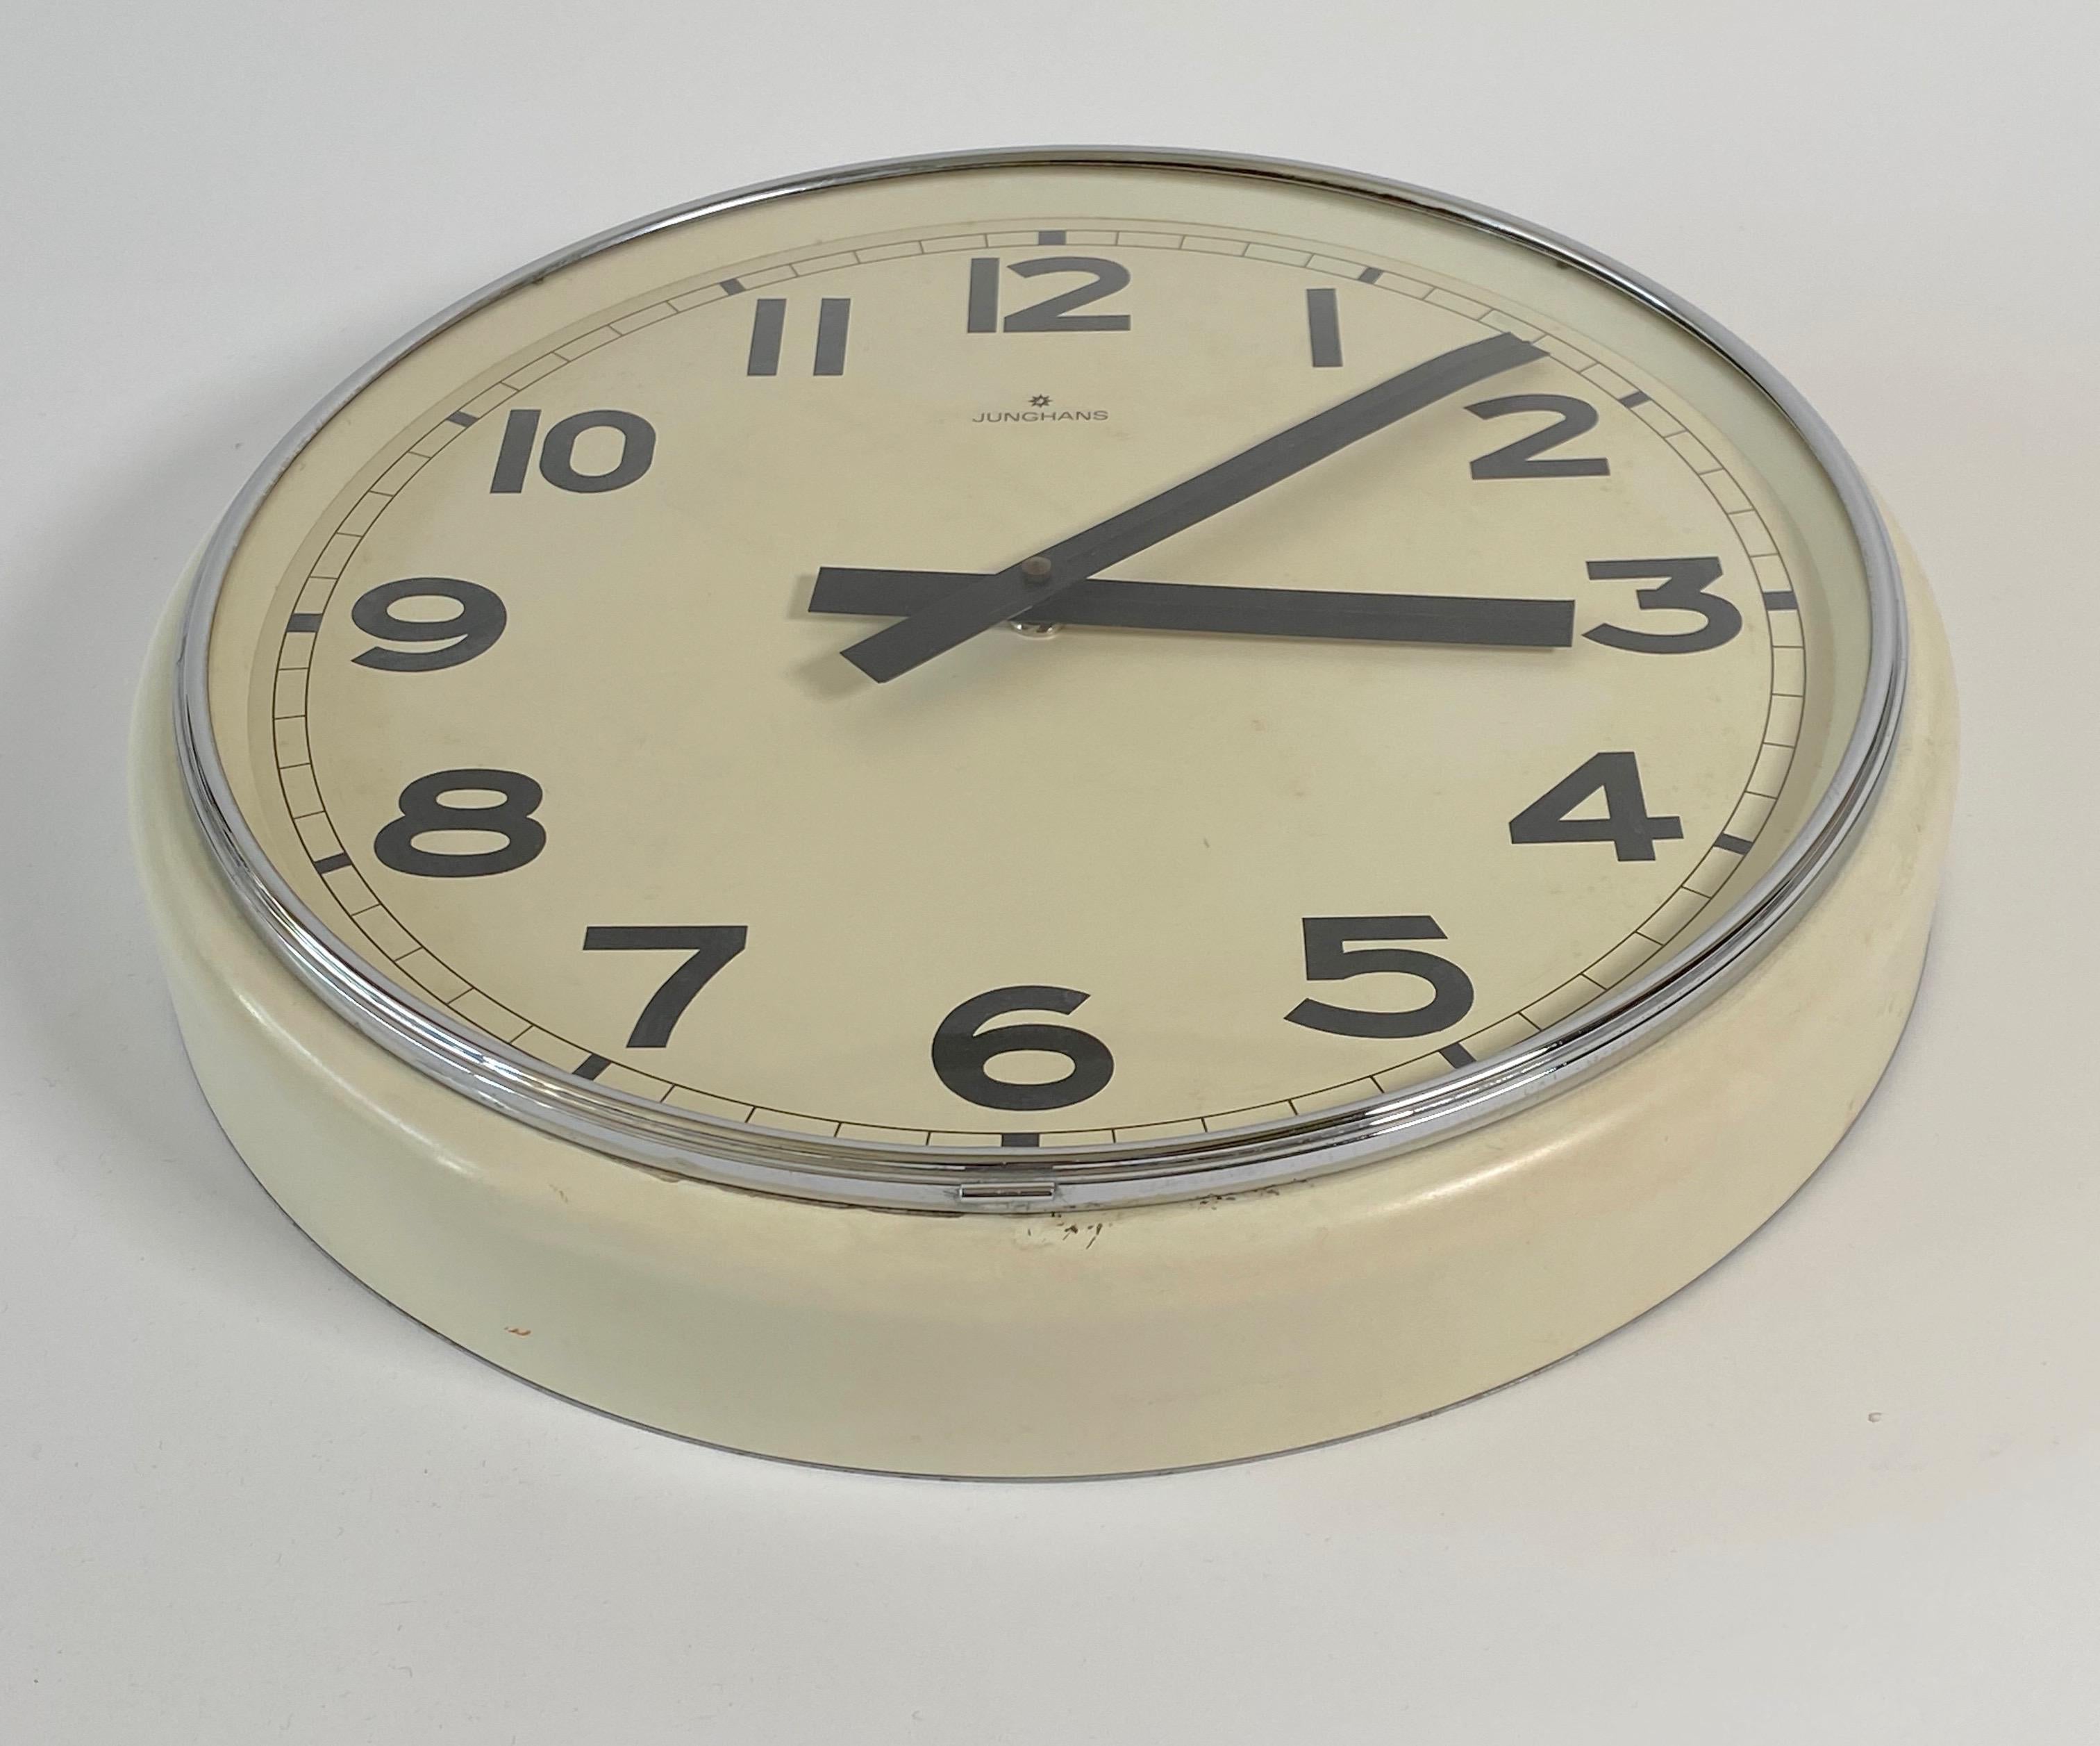 Hand-Crafted  1960s Germany Junghans Wall Clock in the  style of  Max Bill Industrial Design